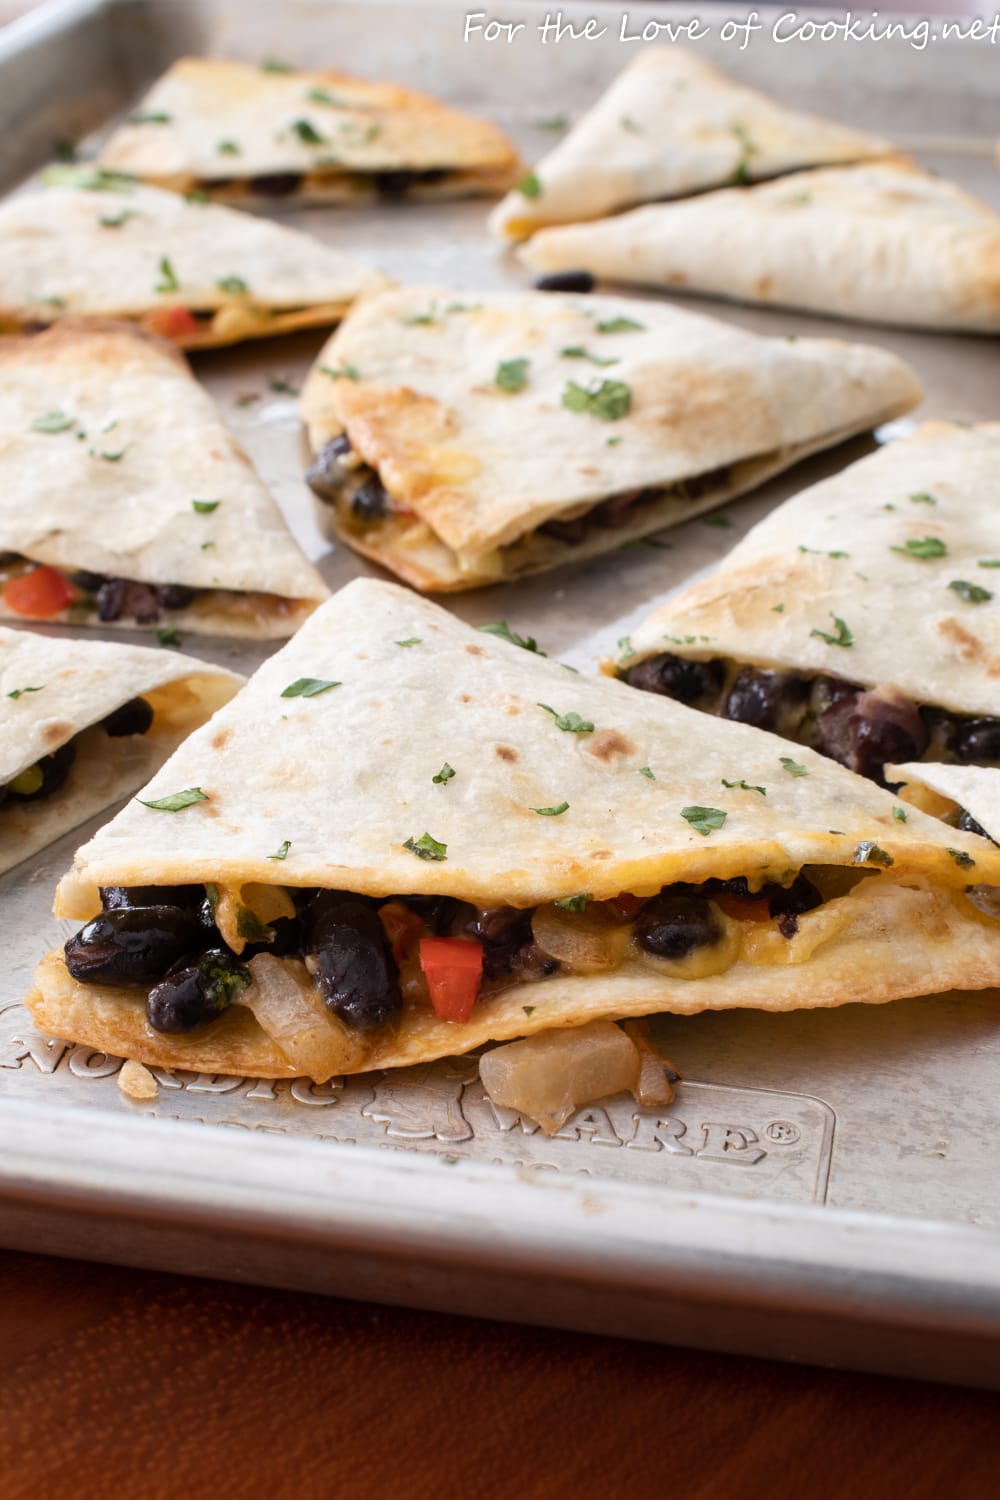 Baked Black Bean and Cheese Quesadillas